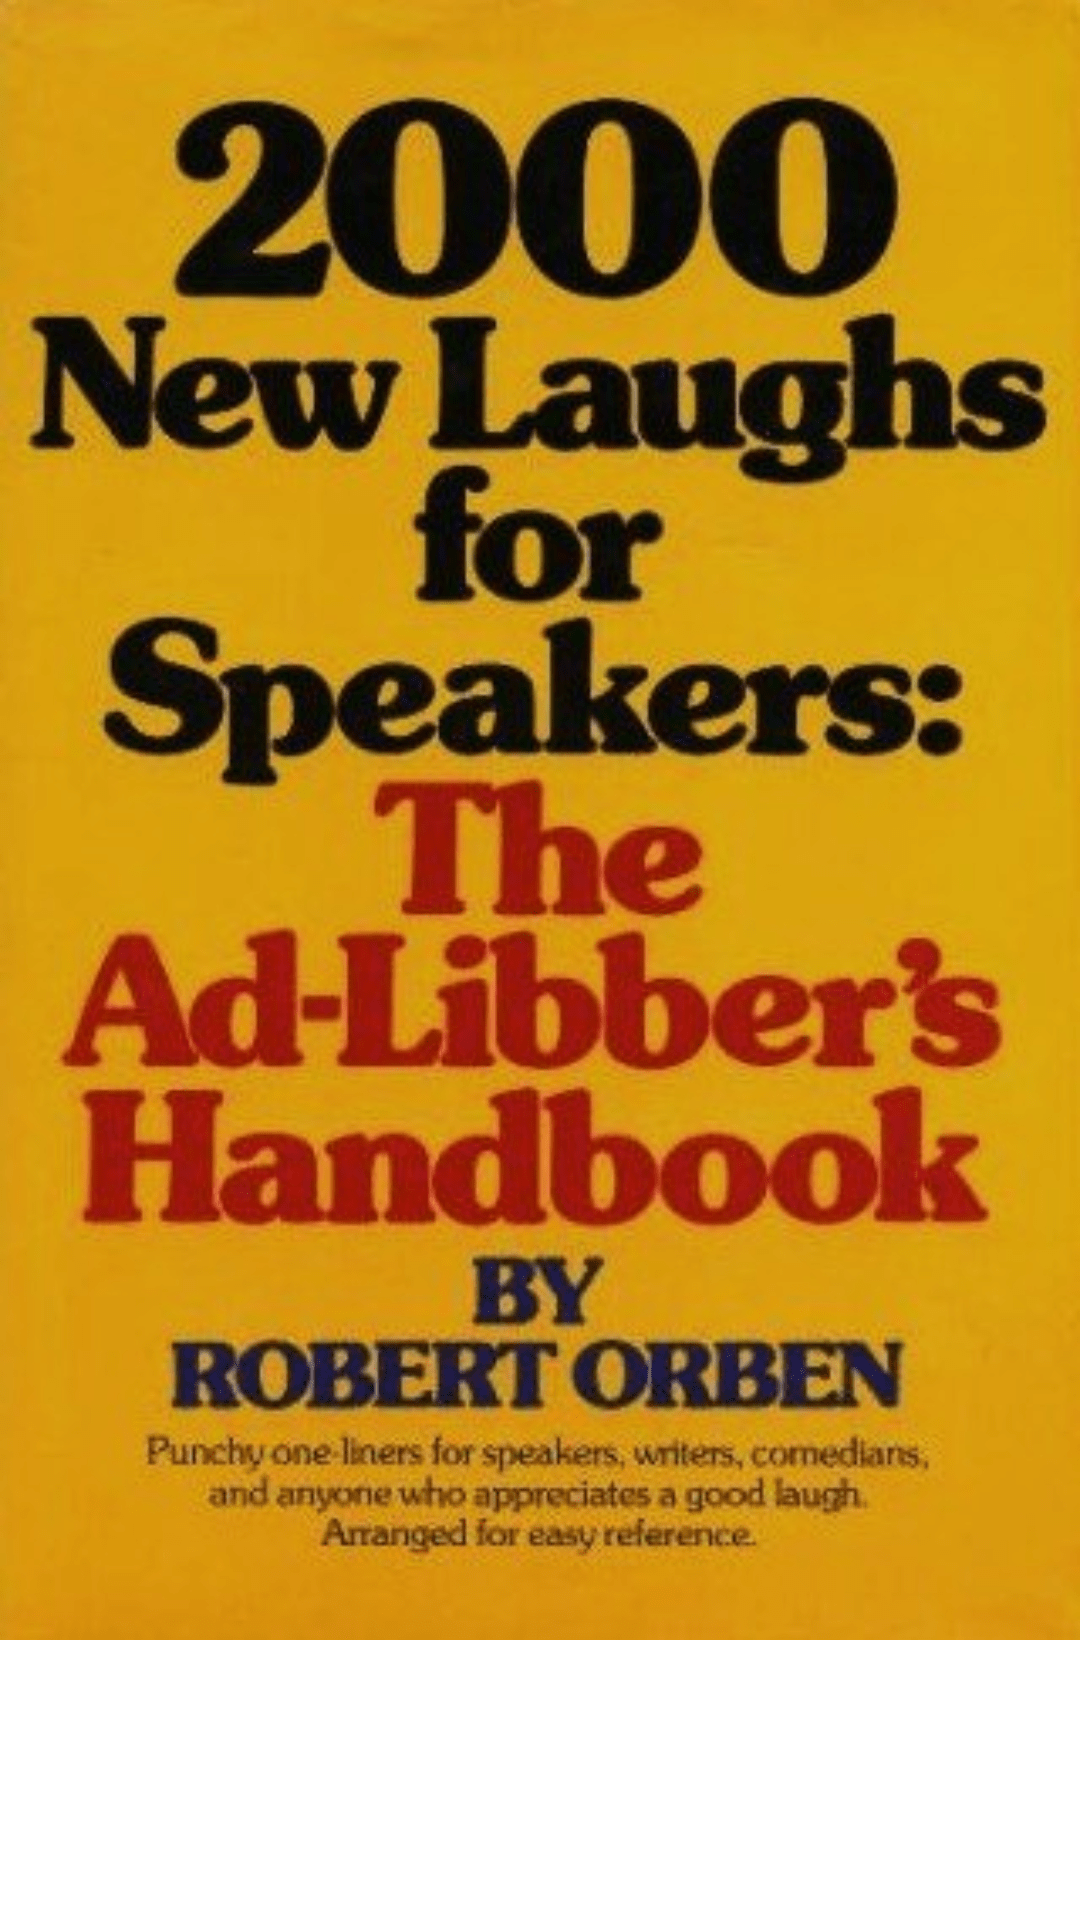 2000 New Laughs for Speakers